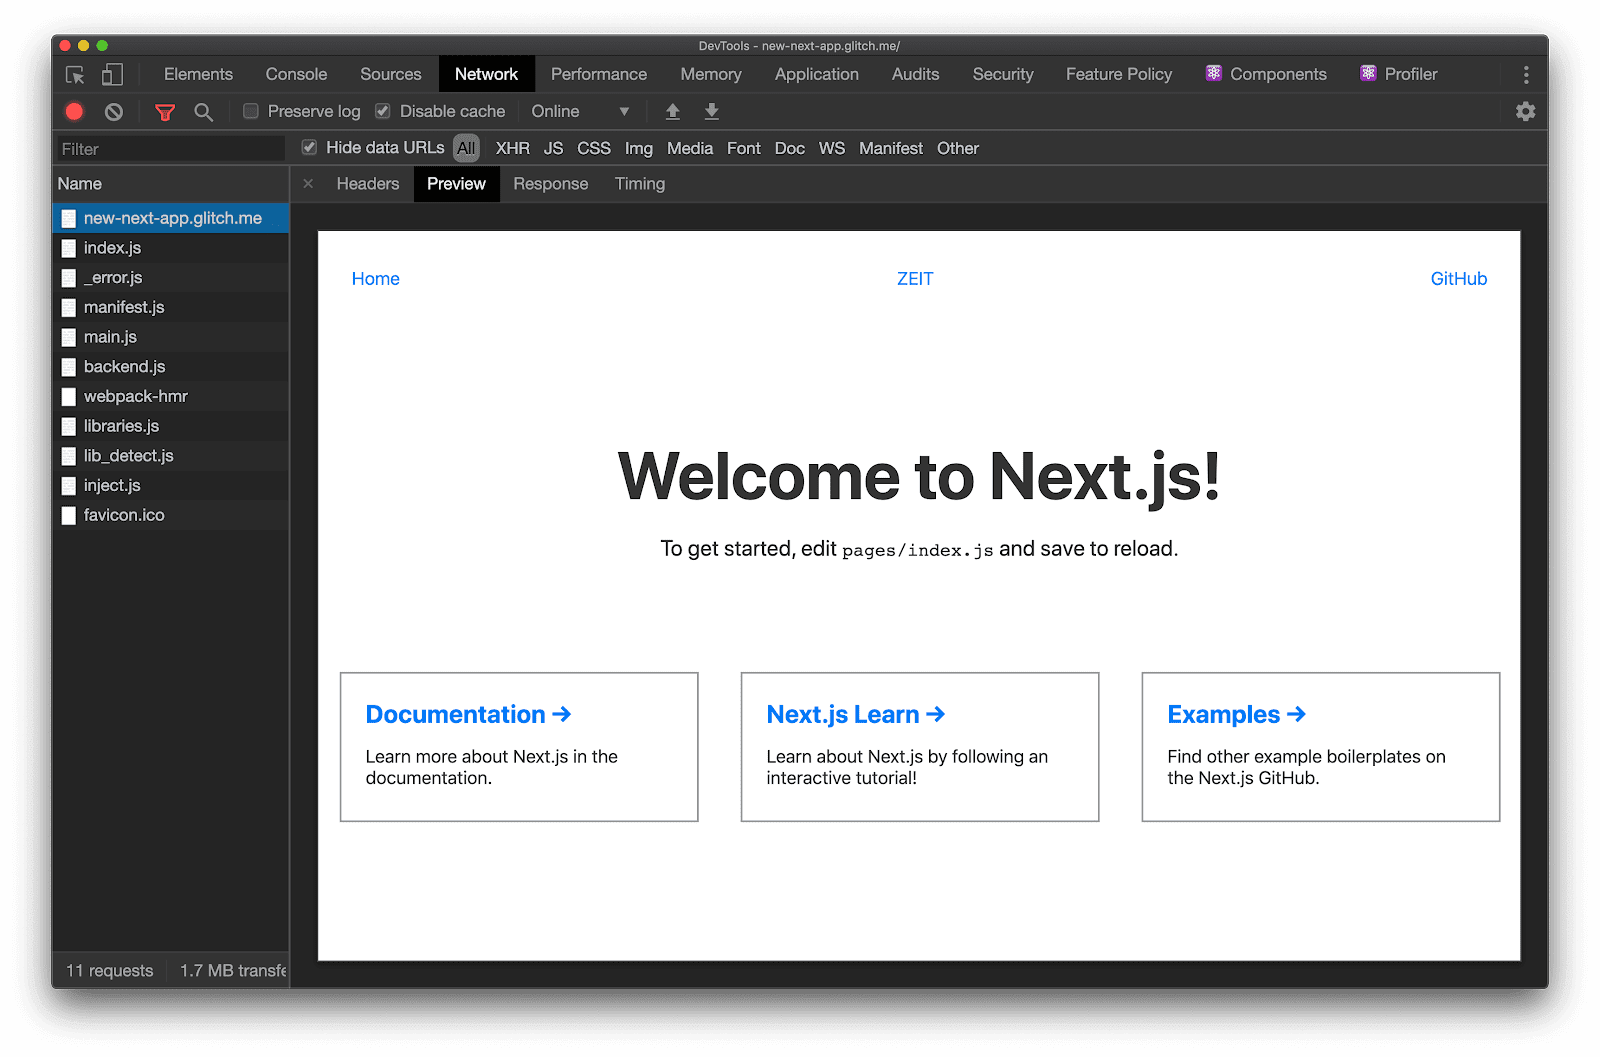 The Preview tab of the Network panel shows that Next.js returns visually complete HTML when a page is requested.